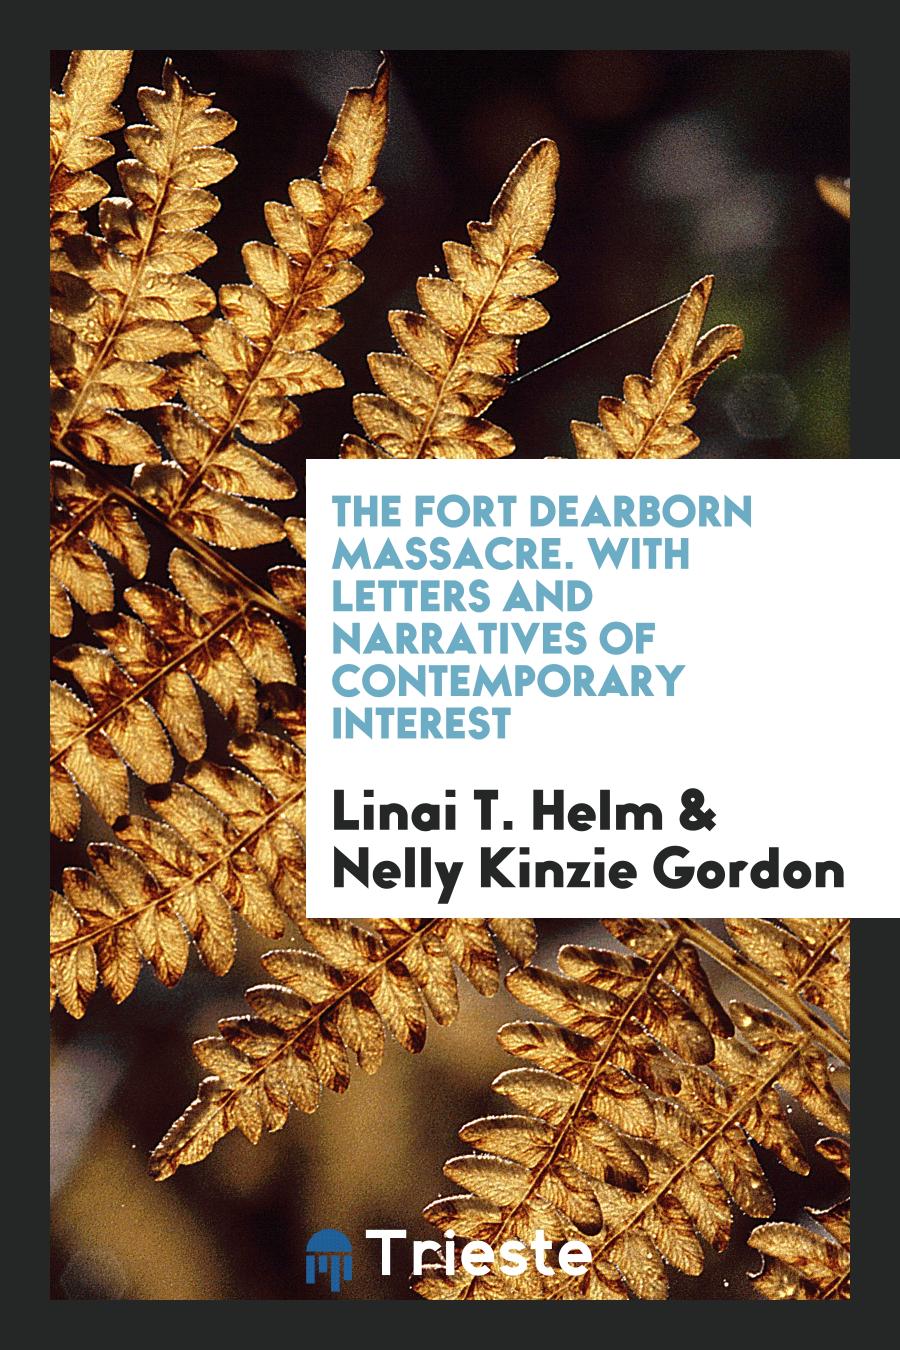 The Fort Dearborn Massacre. With Letters and Narratives of Contemporary Interest